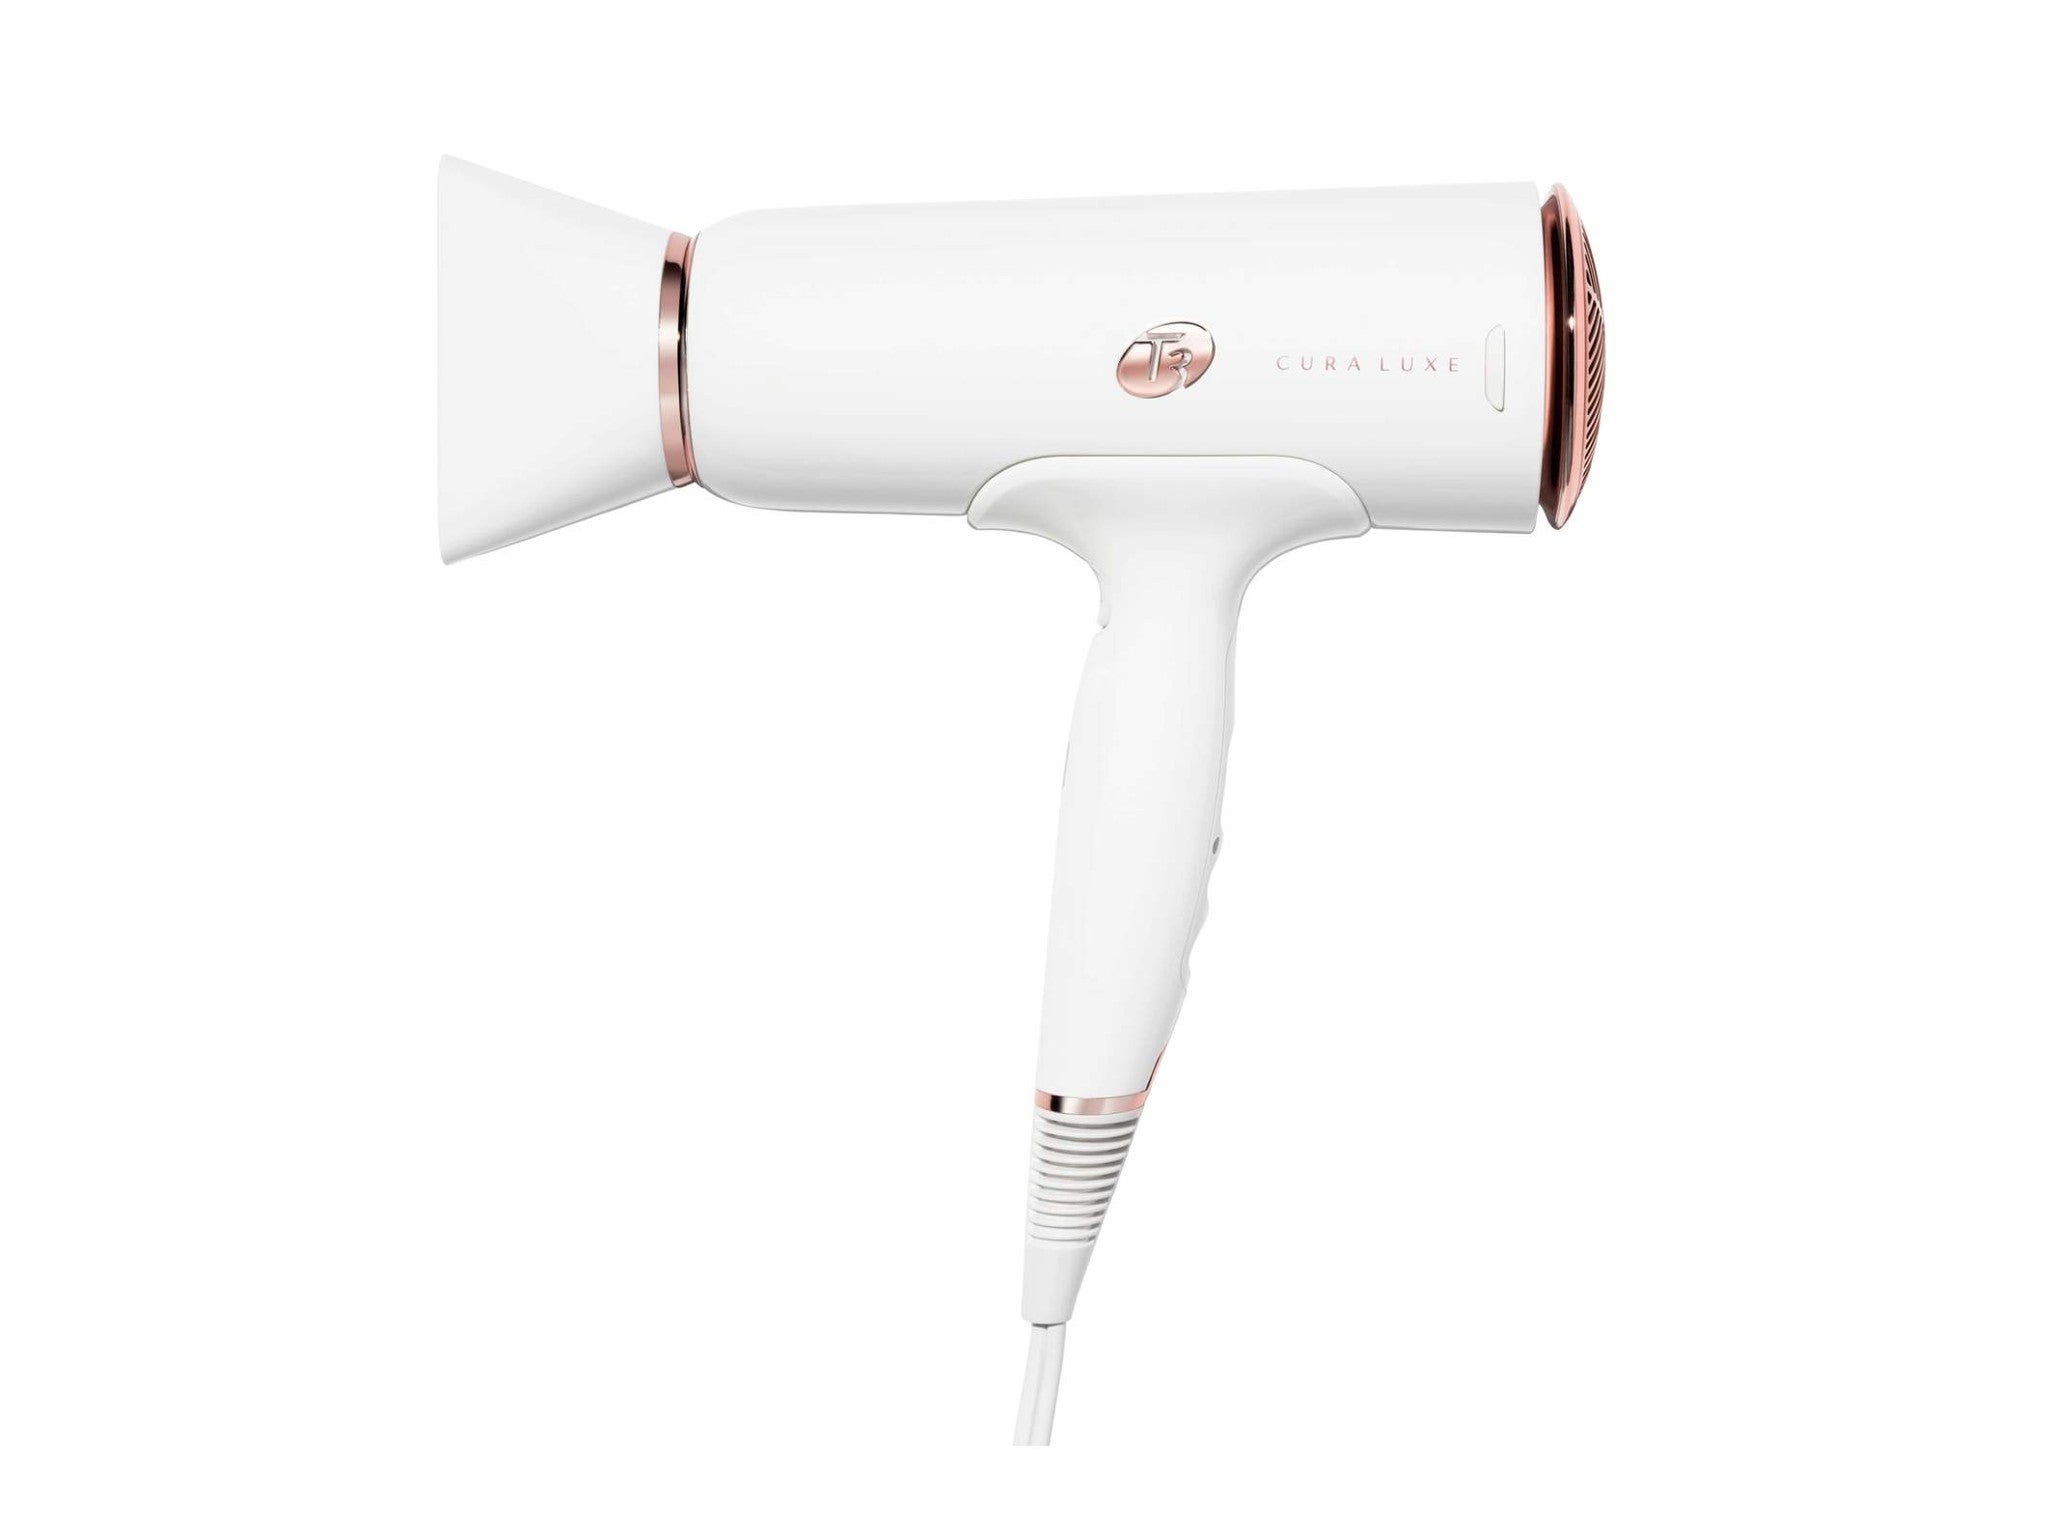 T3 cura luxe hair dryer indybest.jpeg